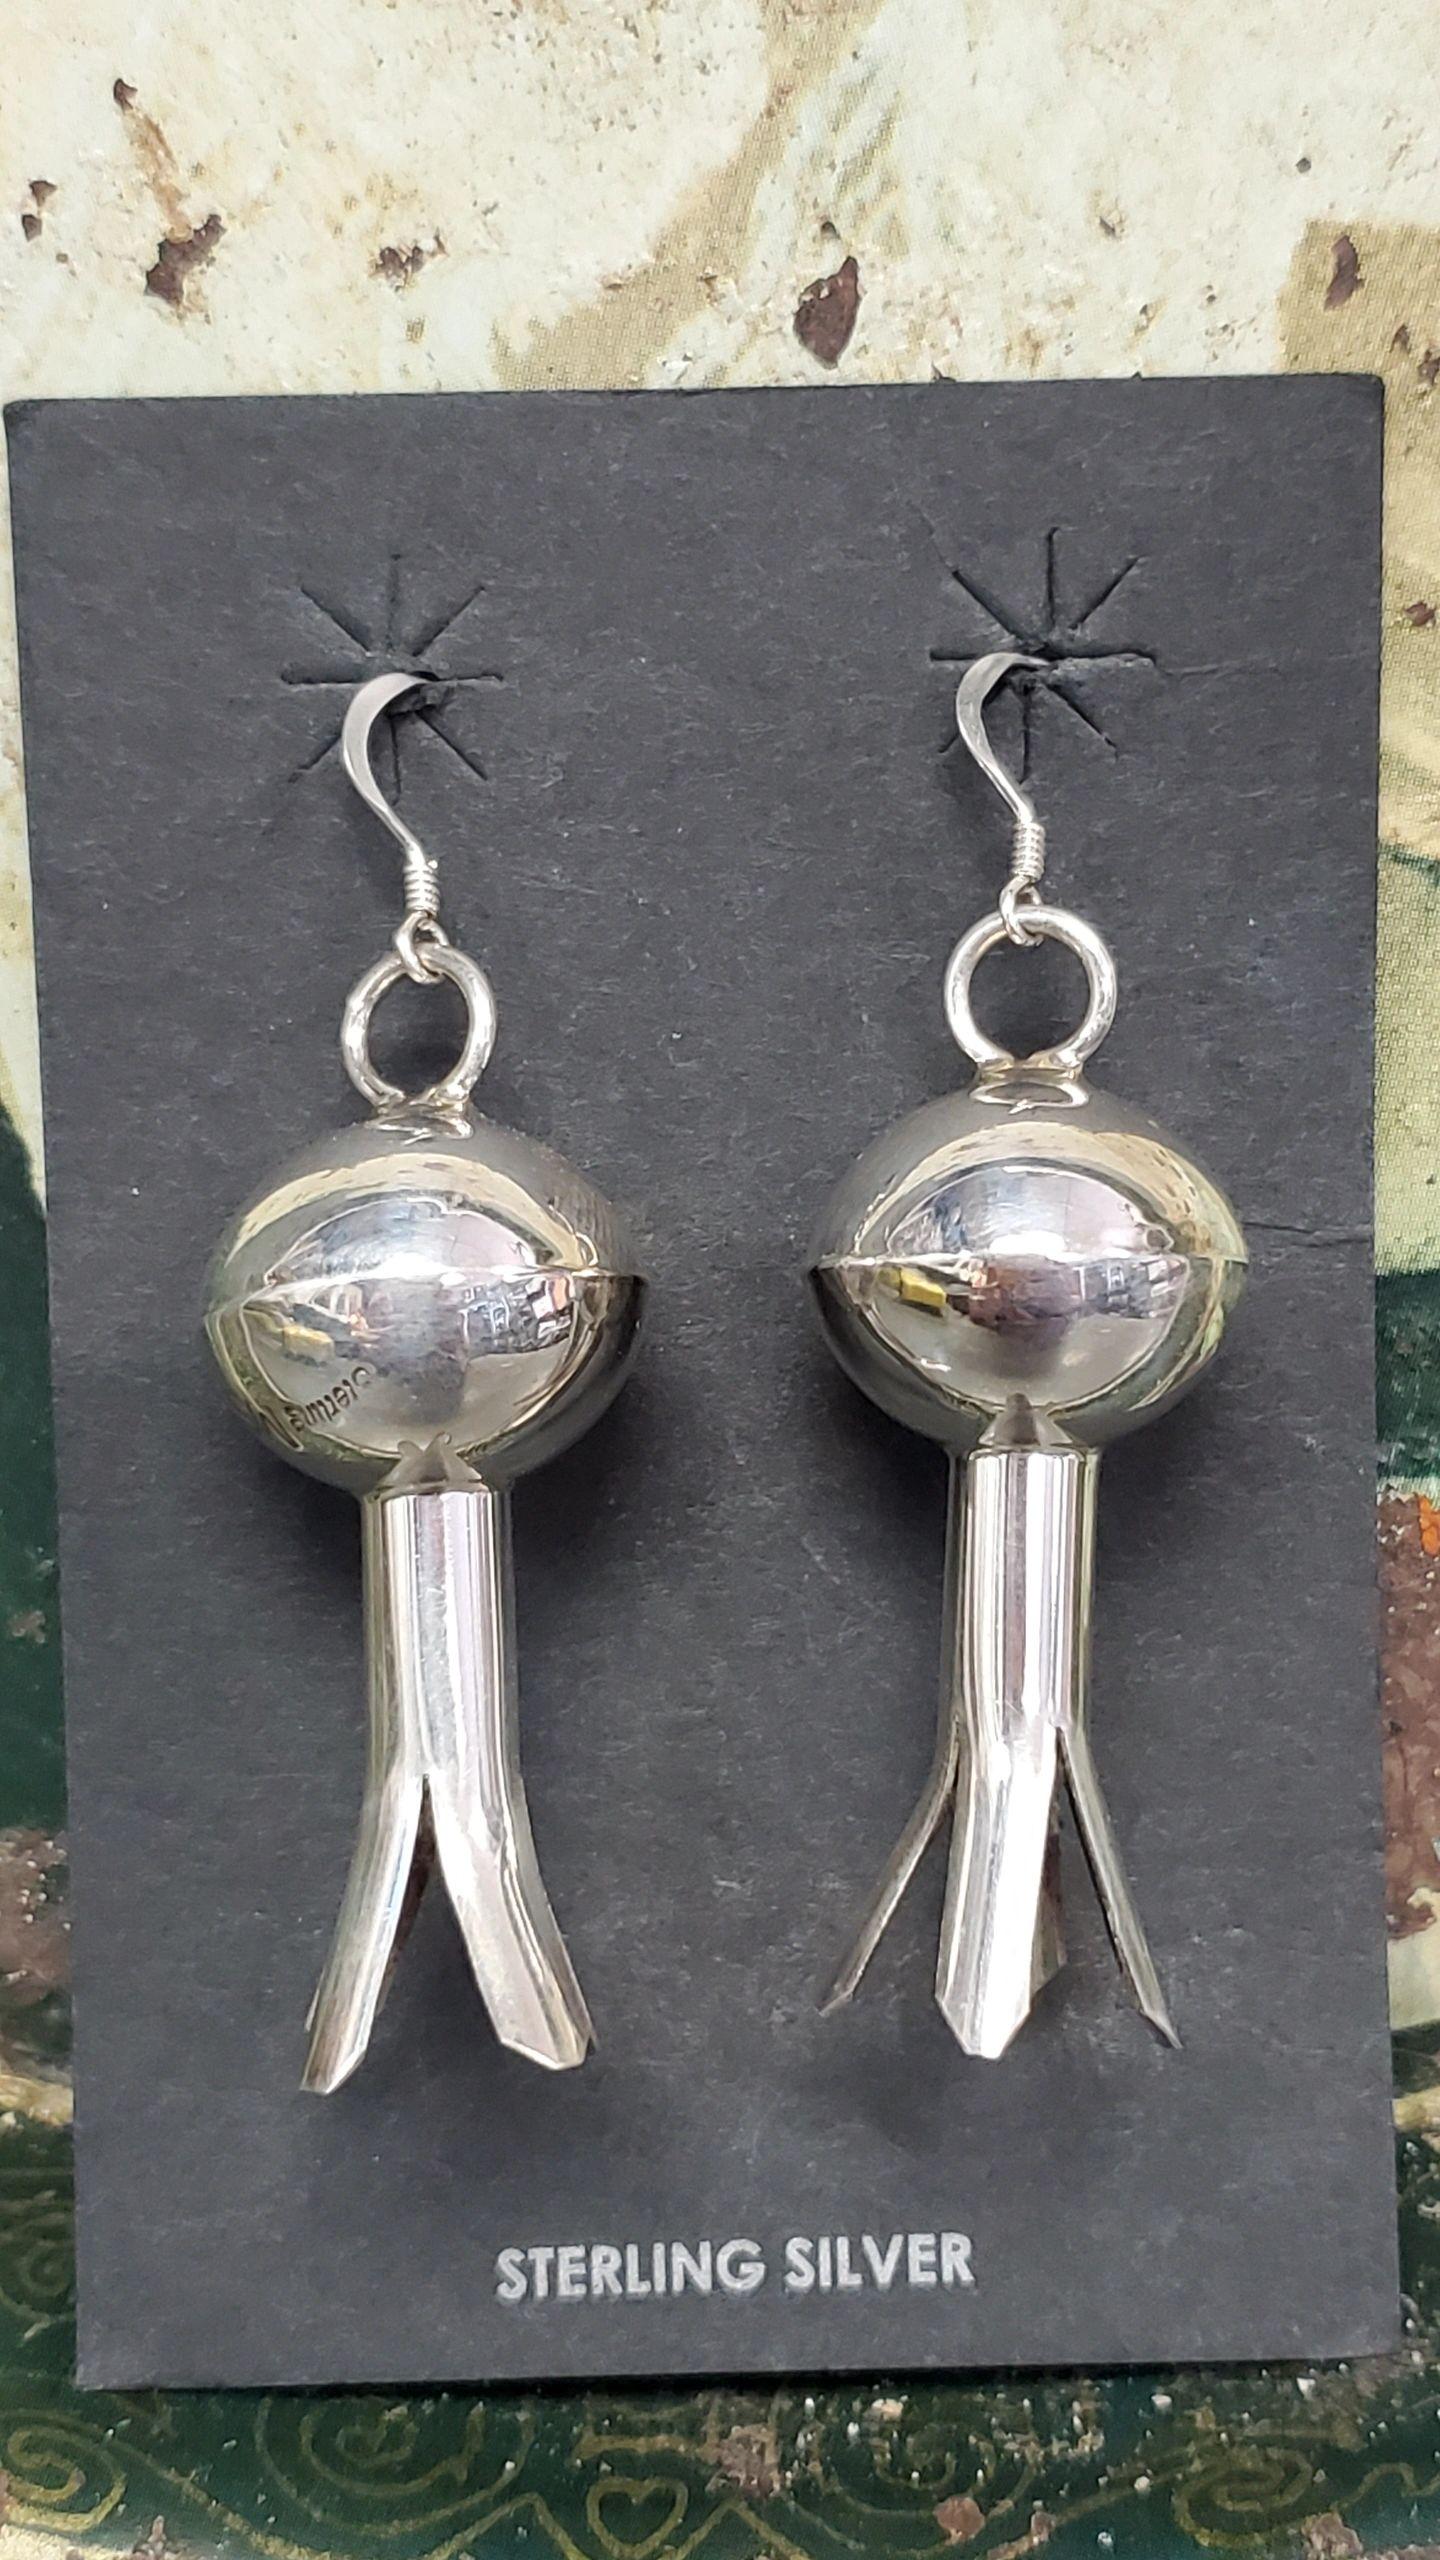 Sterling blossom earrings - Albuquerque Pawn Shop